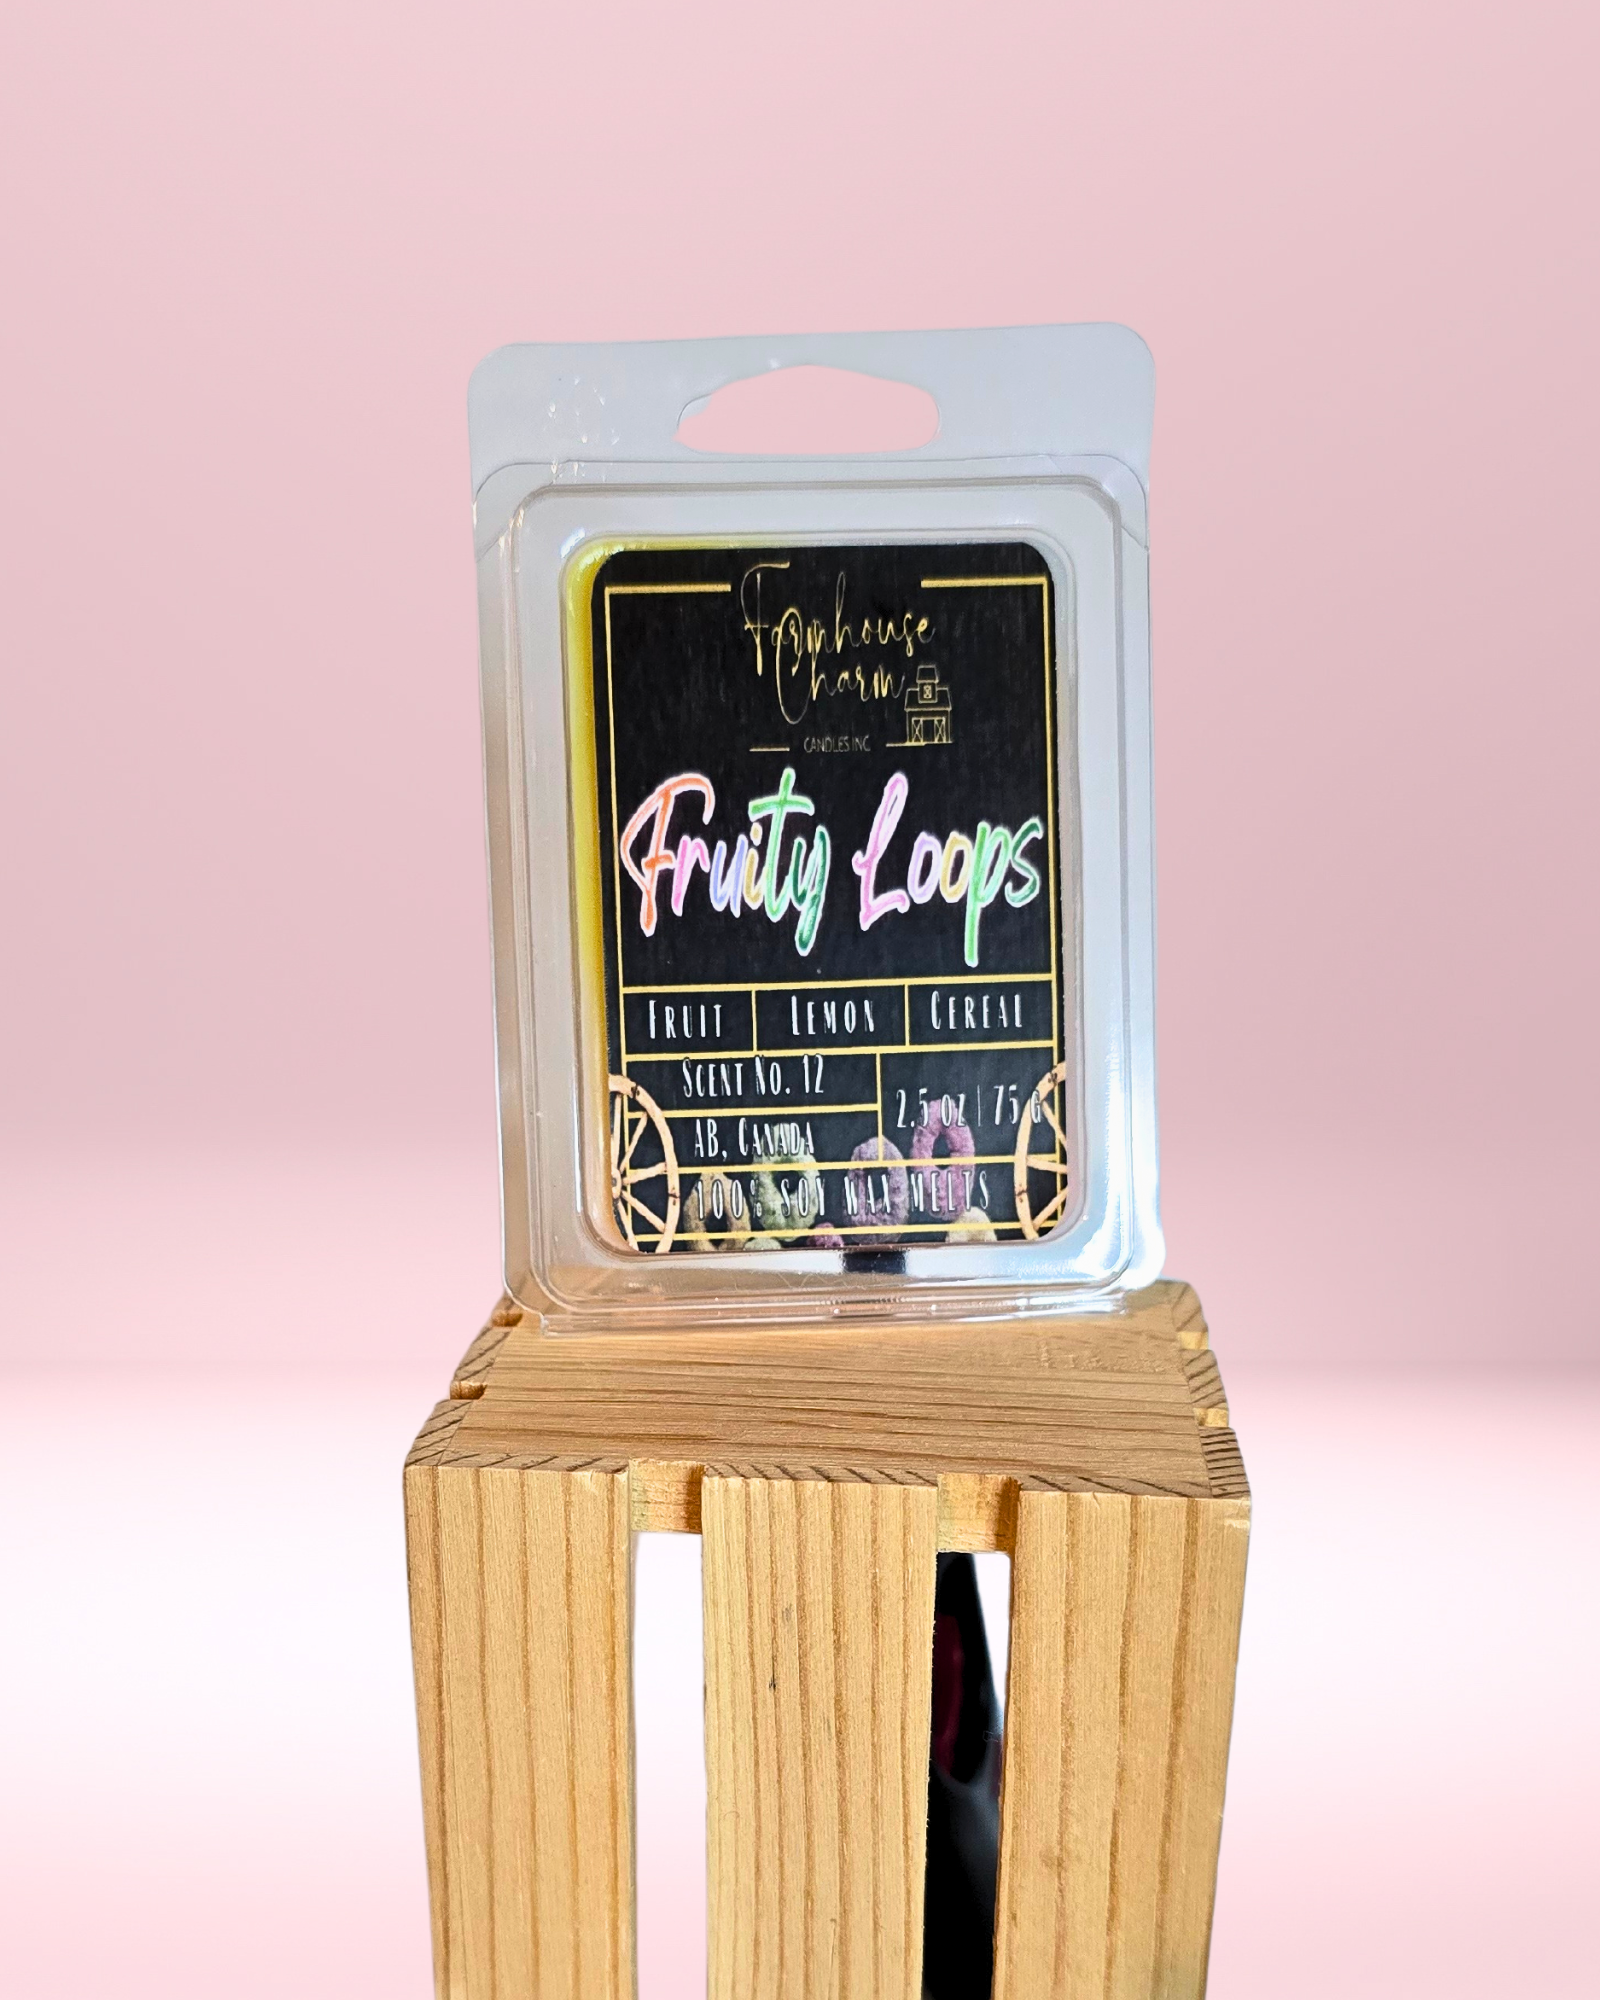 Relive Your Childhood with Fruity Loops Soy Wax Melts. The delightful blend of lemon, cake, and berries will take you back to the nostalgic sweet aroma of carefree Saturday mornings. This wax melt is perfect for anyone who wants to tap into their inner child.   Size: 2.5 oz (75 g)  Fruity Loops Soy Wax Melts is hand poured with love in Alberta, Canada. It is made with 100% natural soy wax and premium fragrances that are paraben free and phthalate free fragrance. 